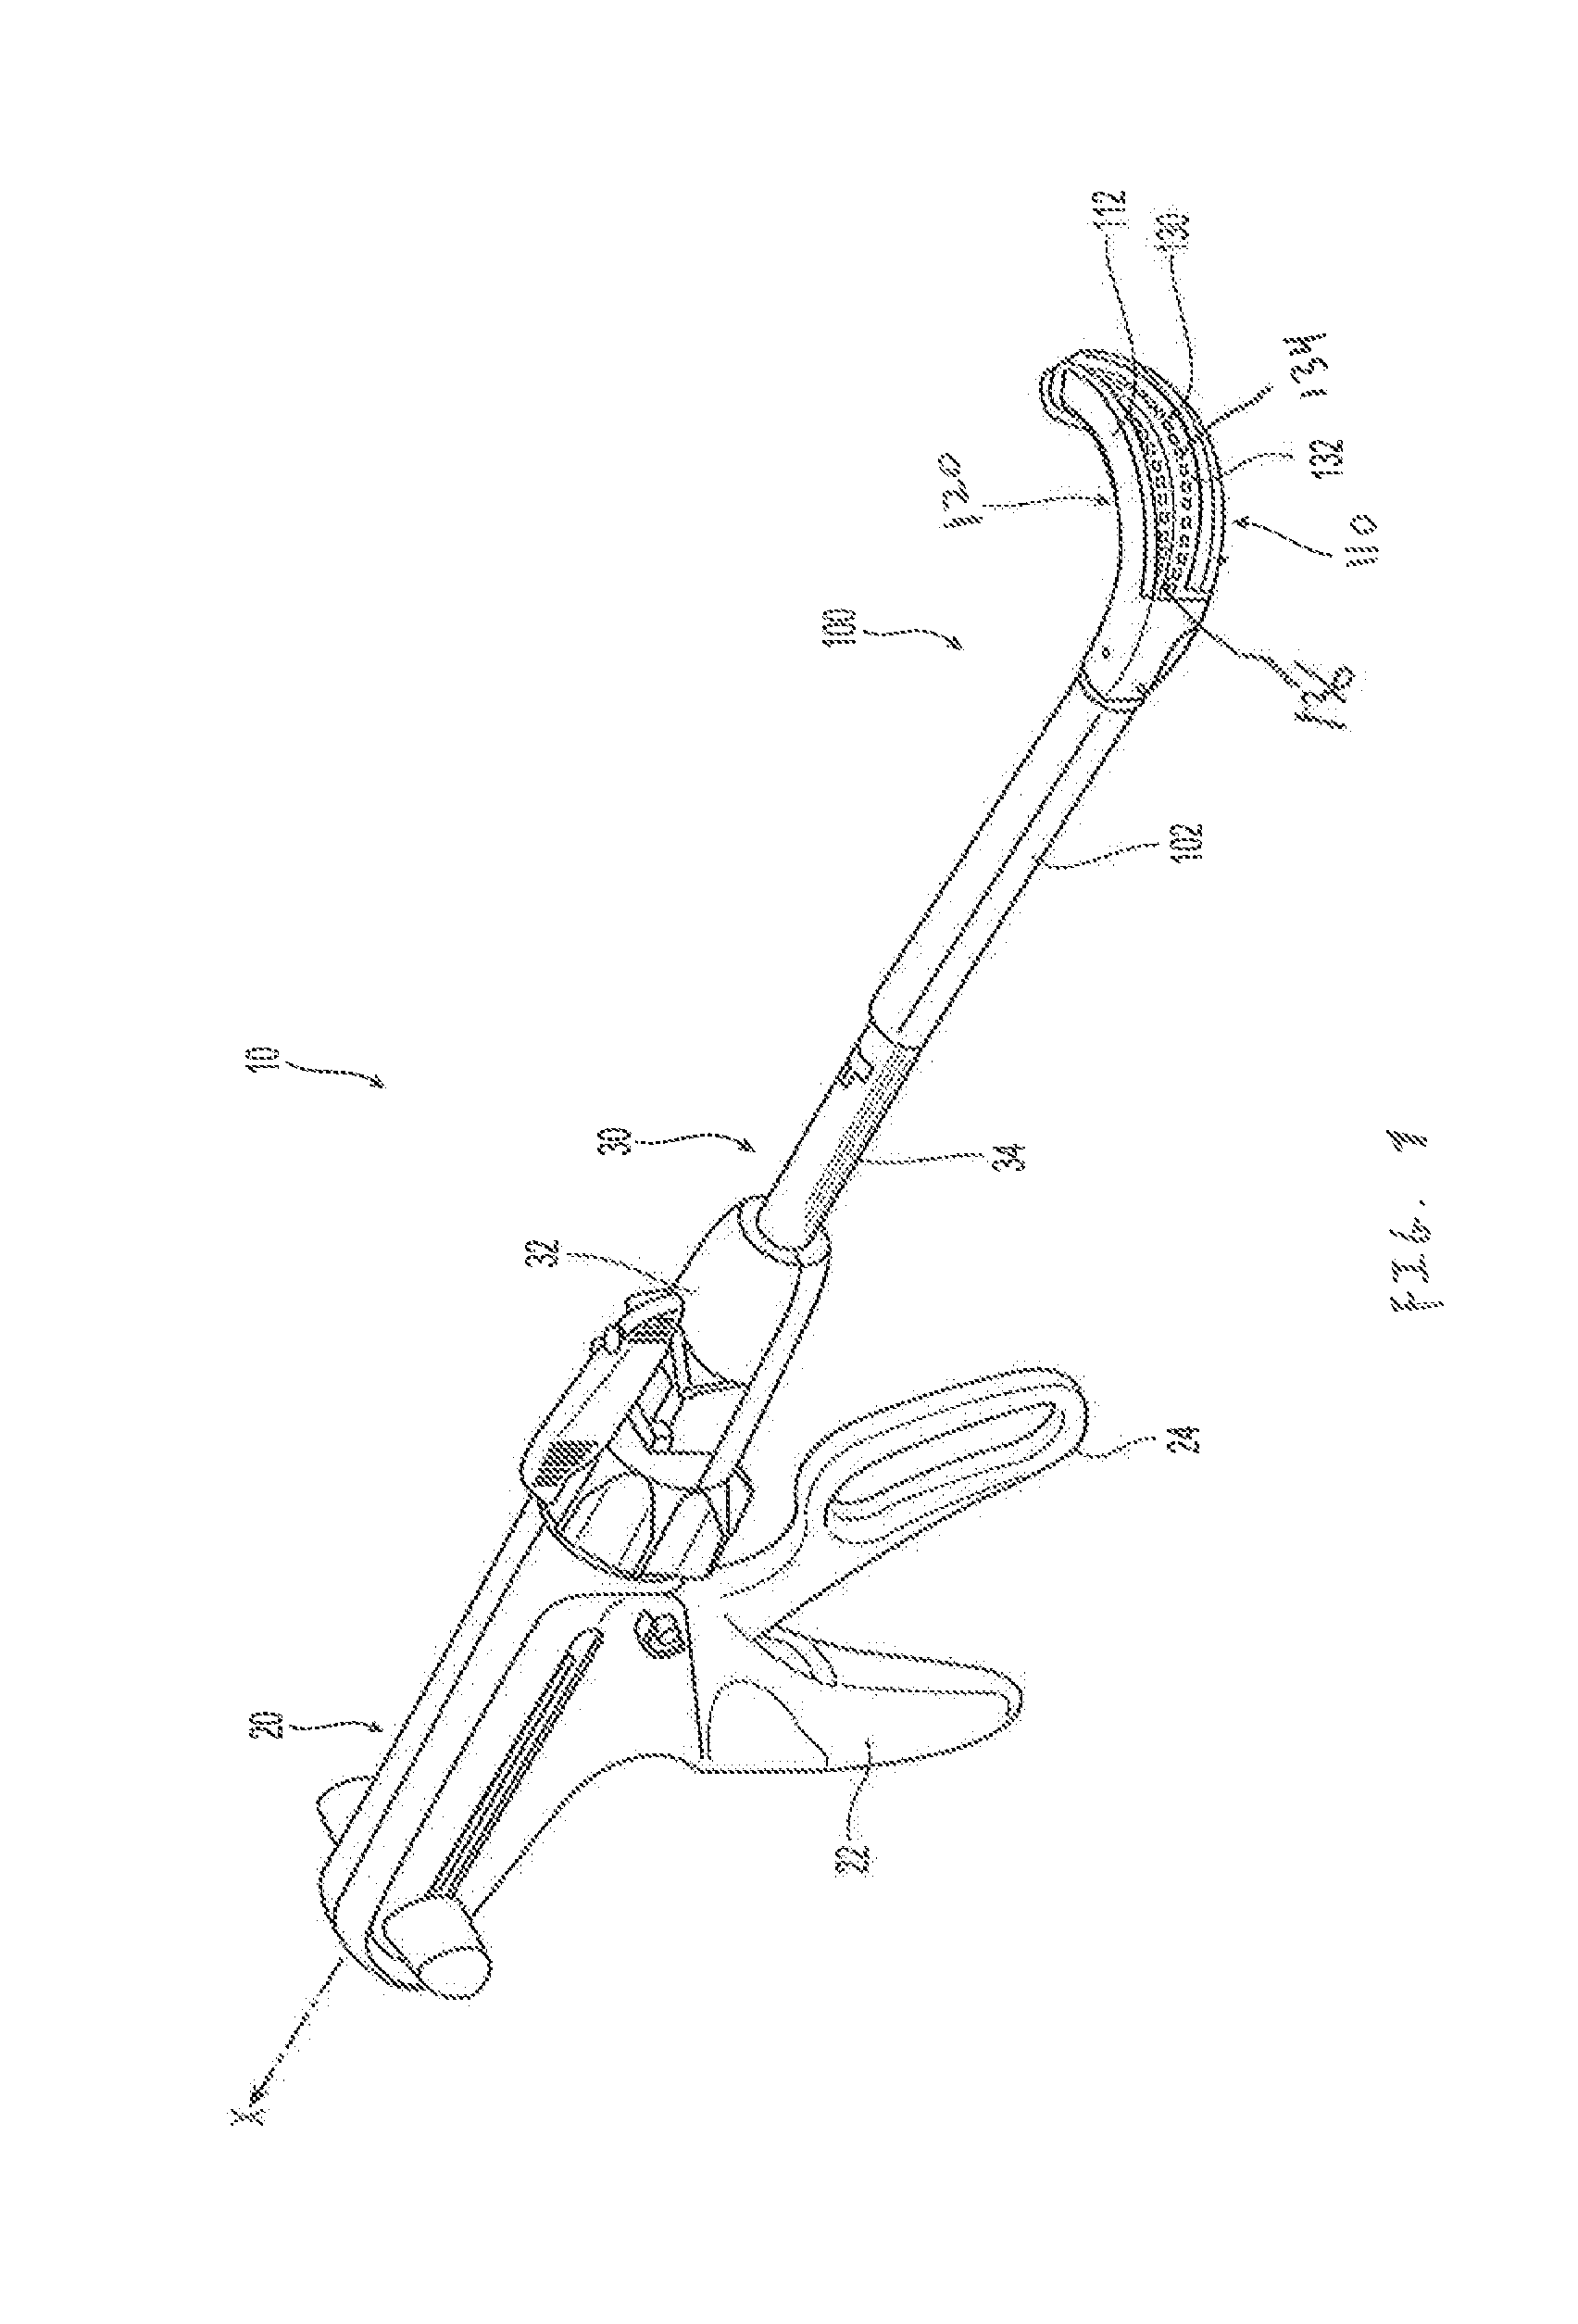 Jaw members and methods of manufacture